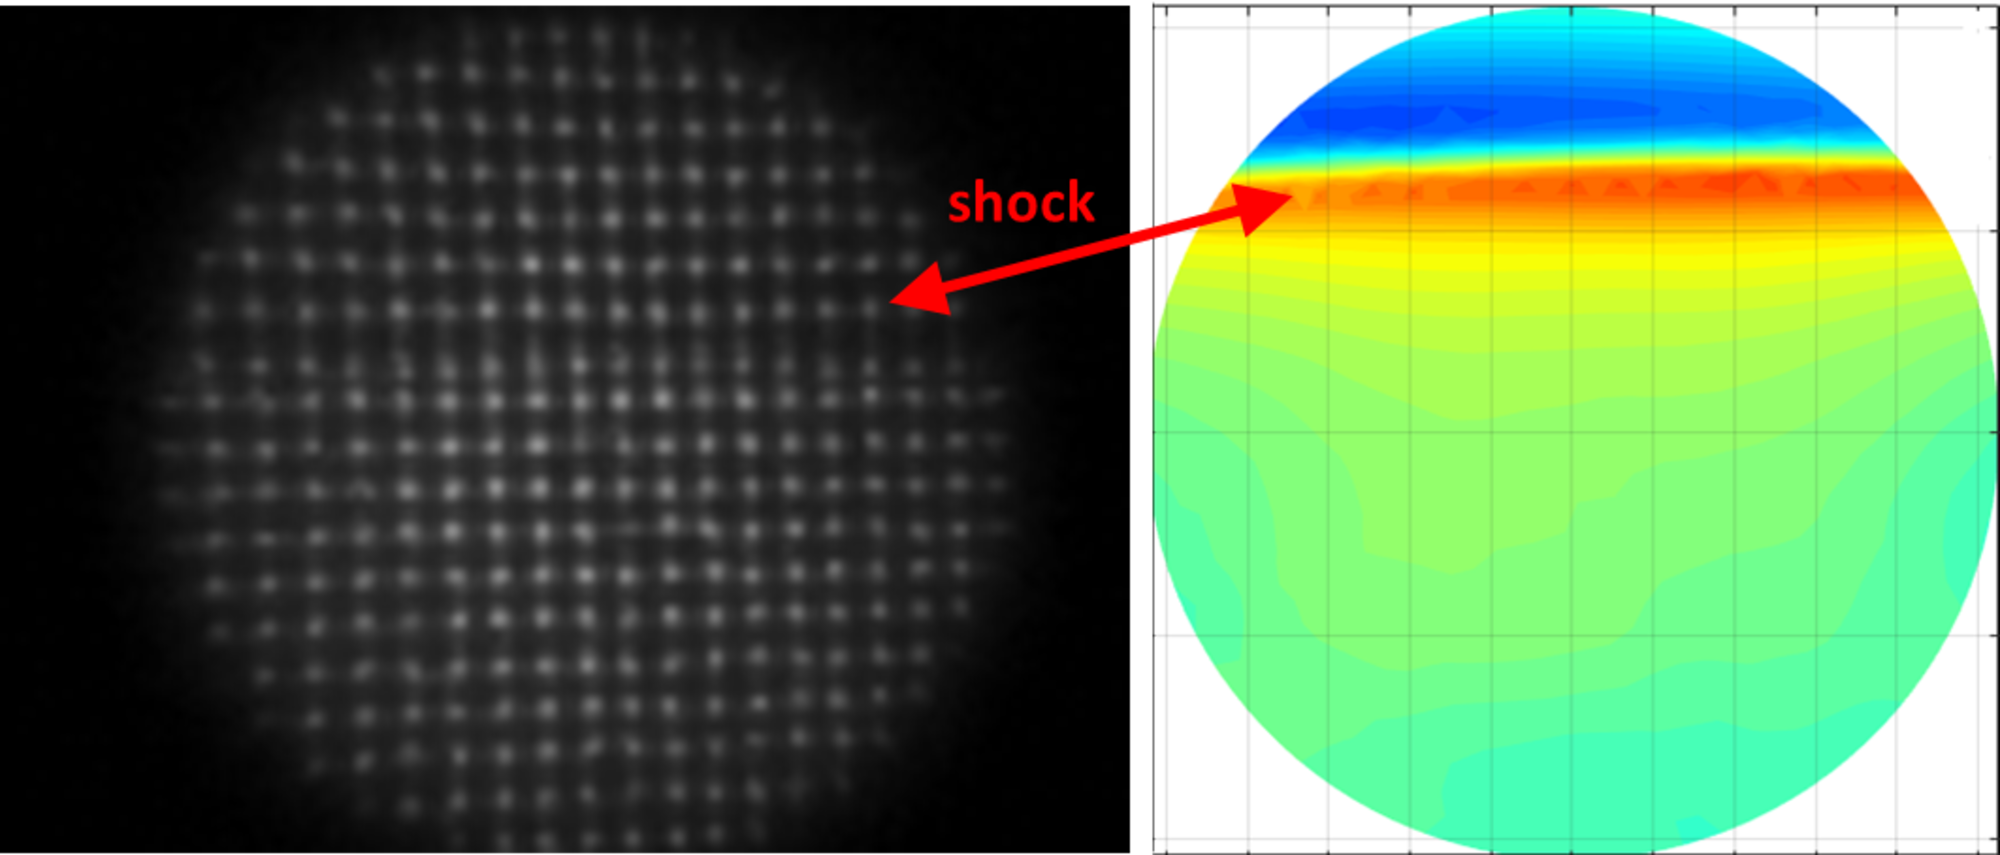 High-speed wavefront measurements were made over the aperture of the directed energy pod. The image on the left shows a shock over the aperture. The image on the right shows an example of computational fluid dynamics-predicted optical distortion formed over the aperture for similar flow conditions. (Image courtesy of MZA Associates Corp.)